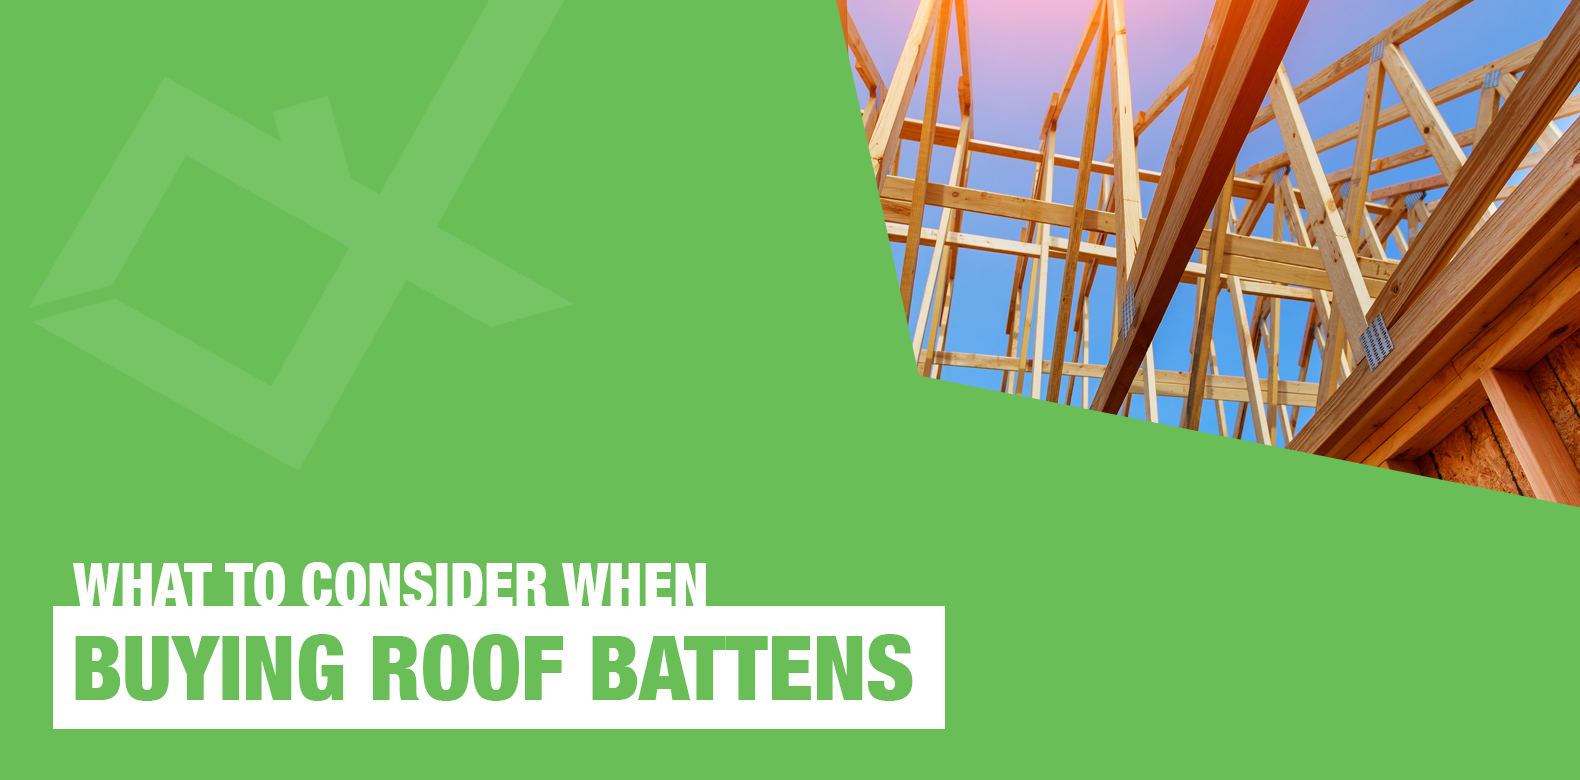 Roof Battens: What You Need to Consider